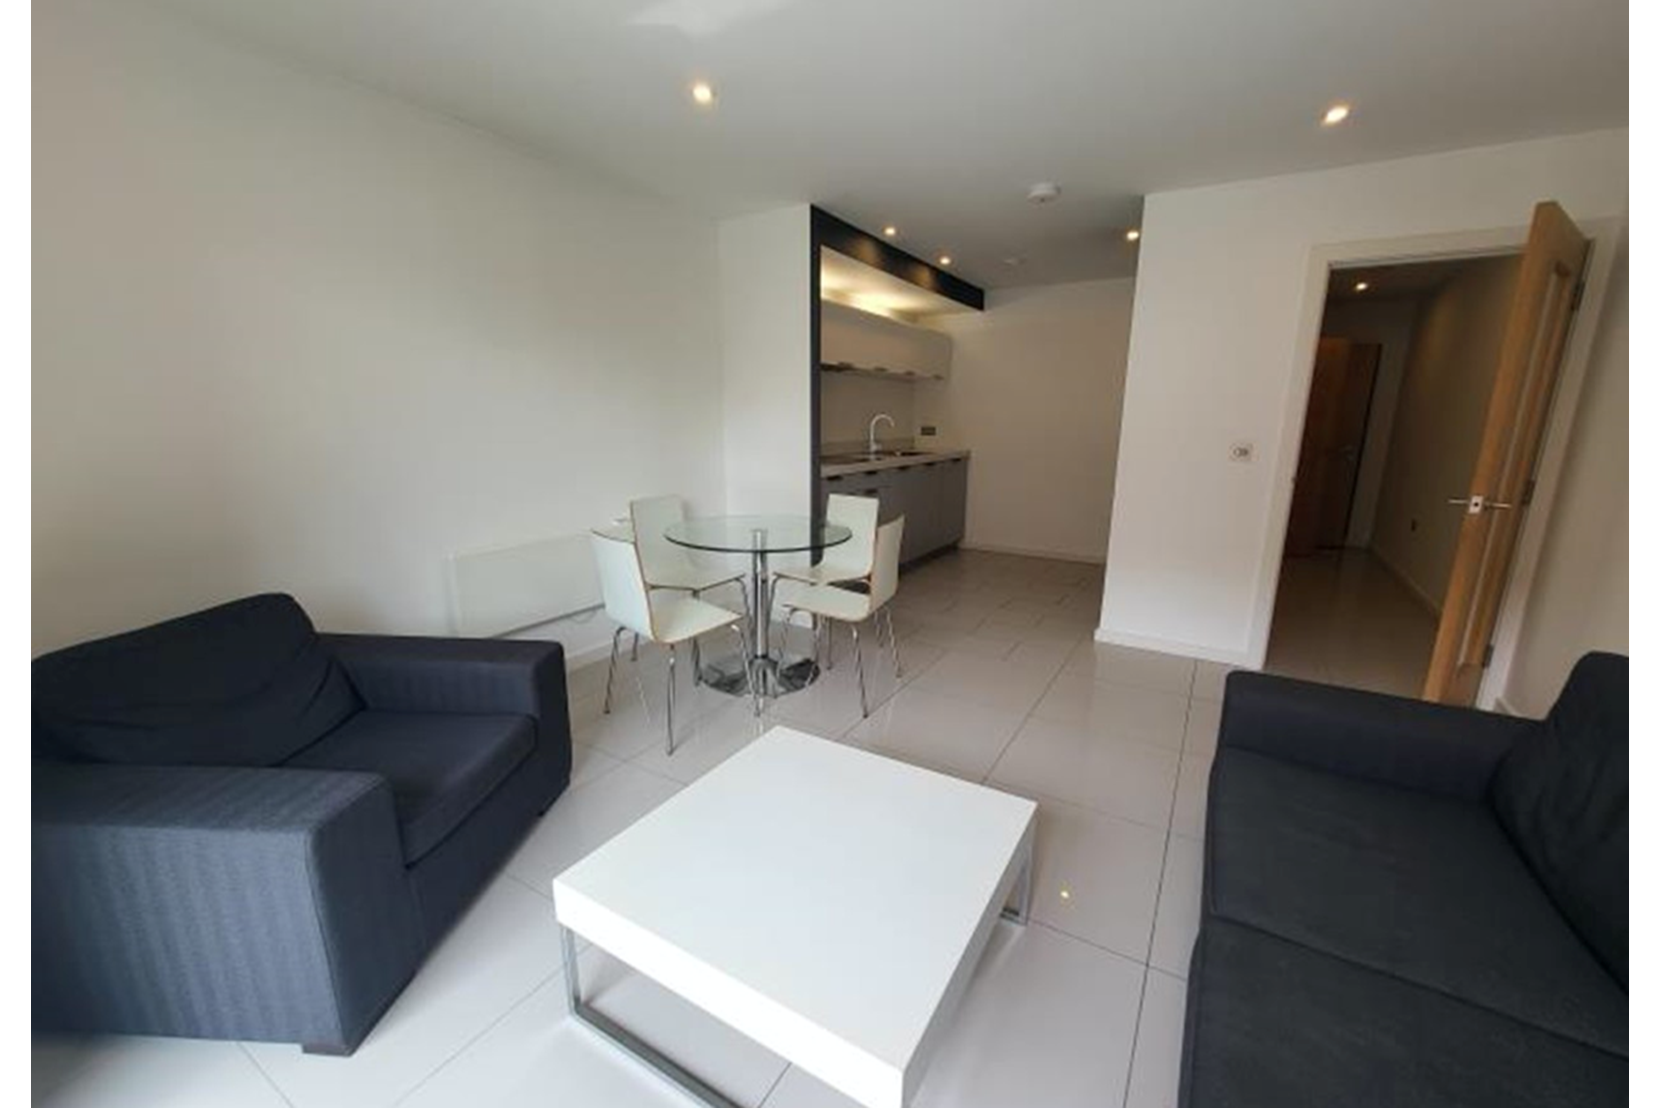 Apartments to Rent by Northern Group at Ice Plant, Manchester, M4, living dining area